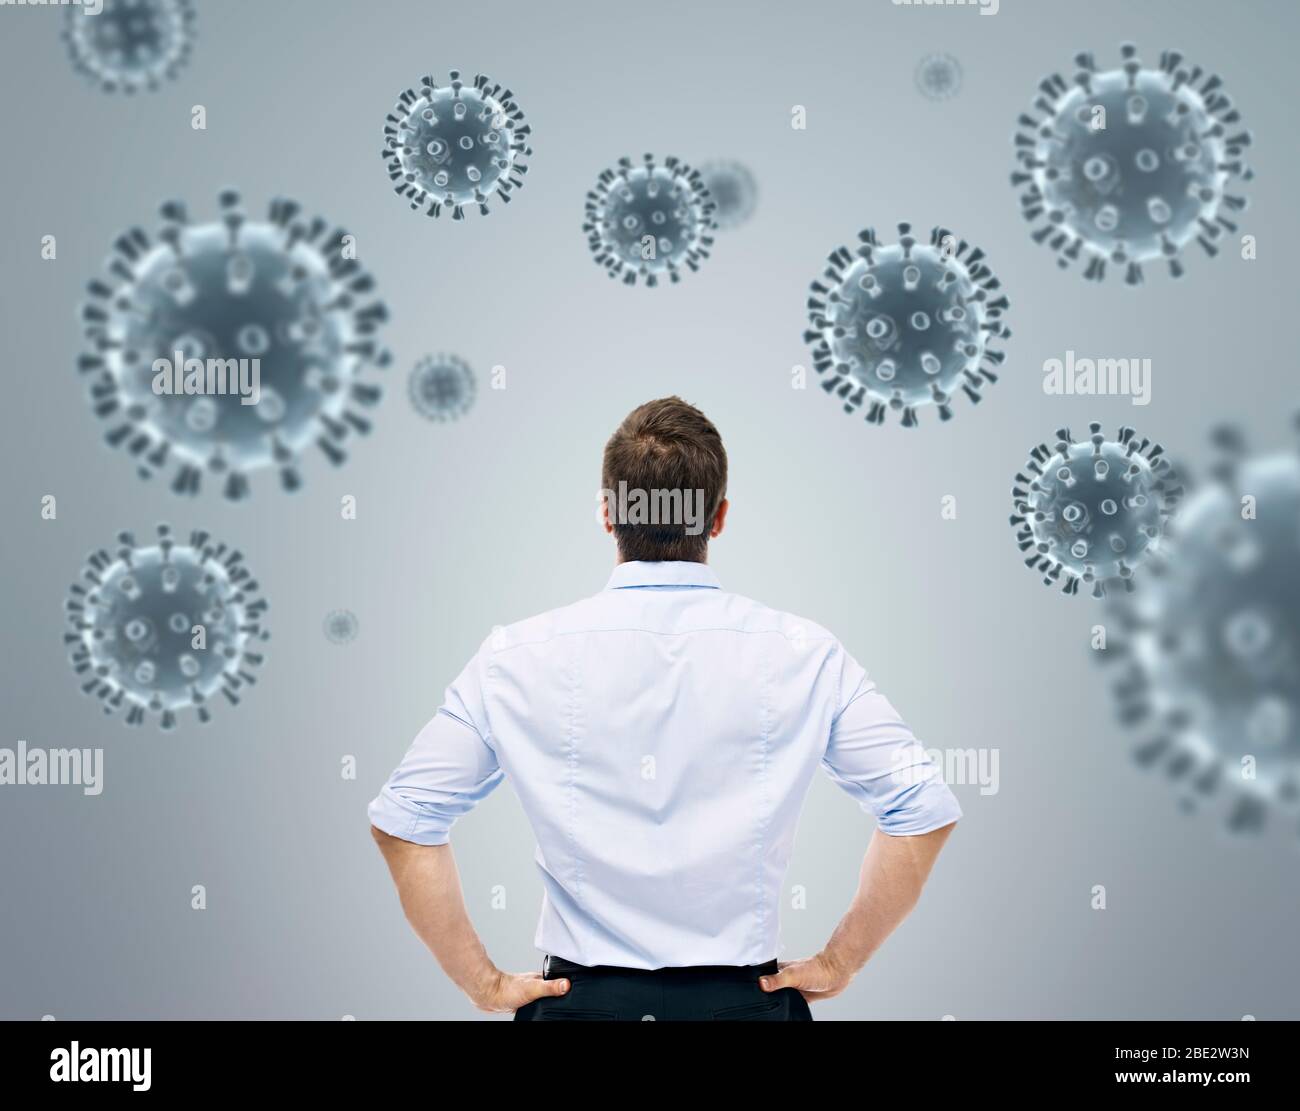 rear view of young  caucasian man looking at 3D coronavirus concept for combating COVID-19 global pandemic Stock Photo